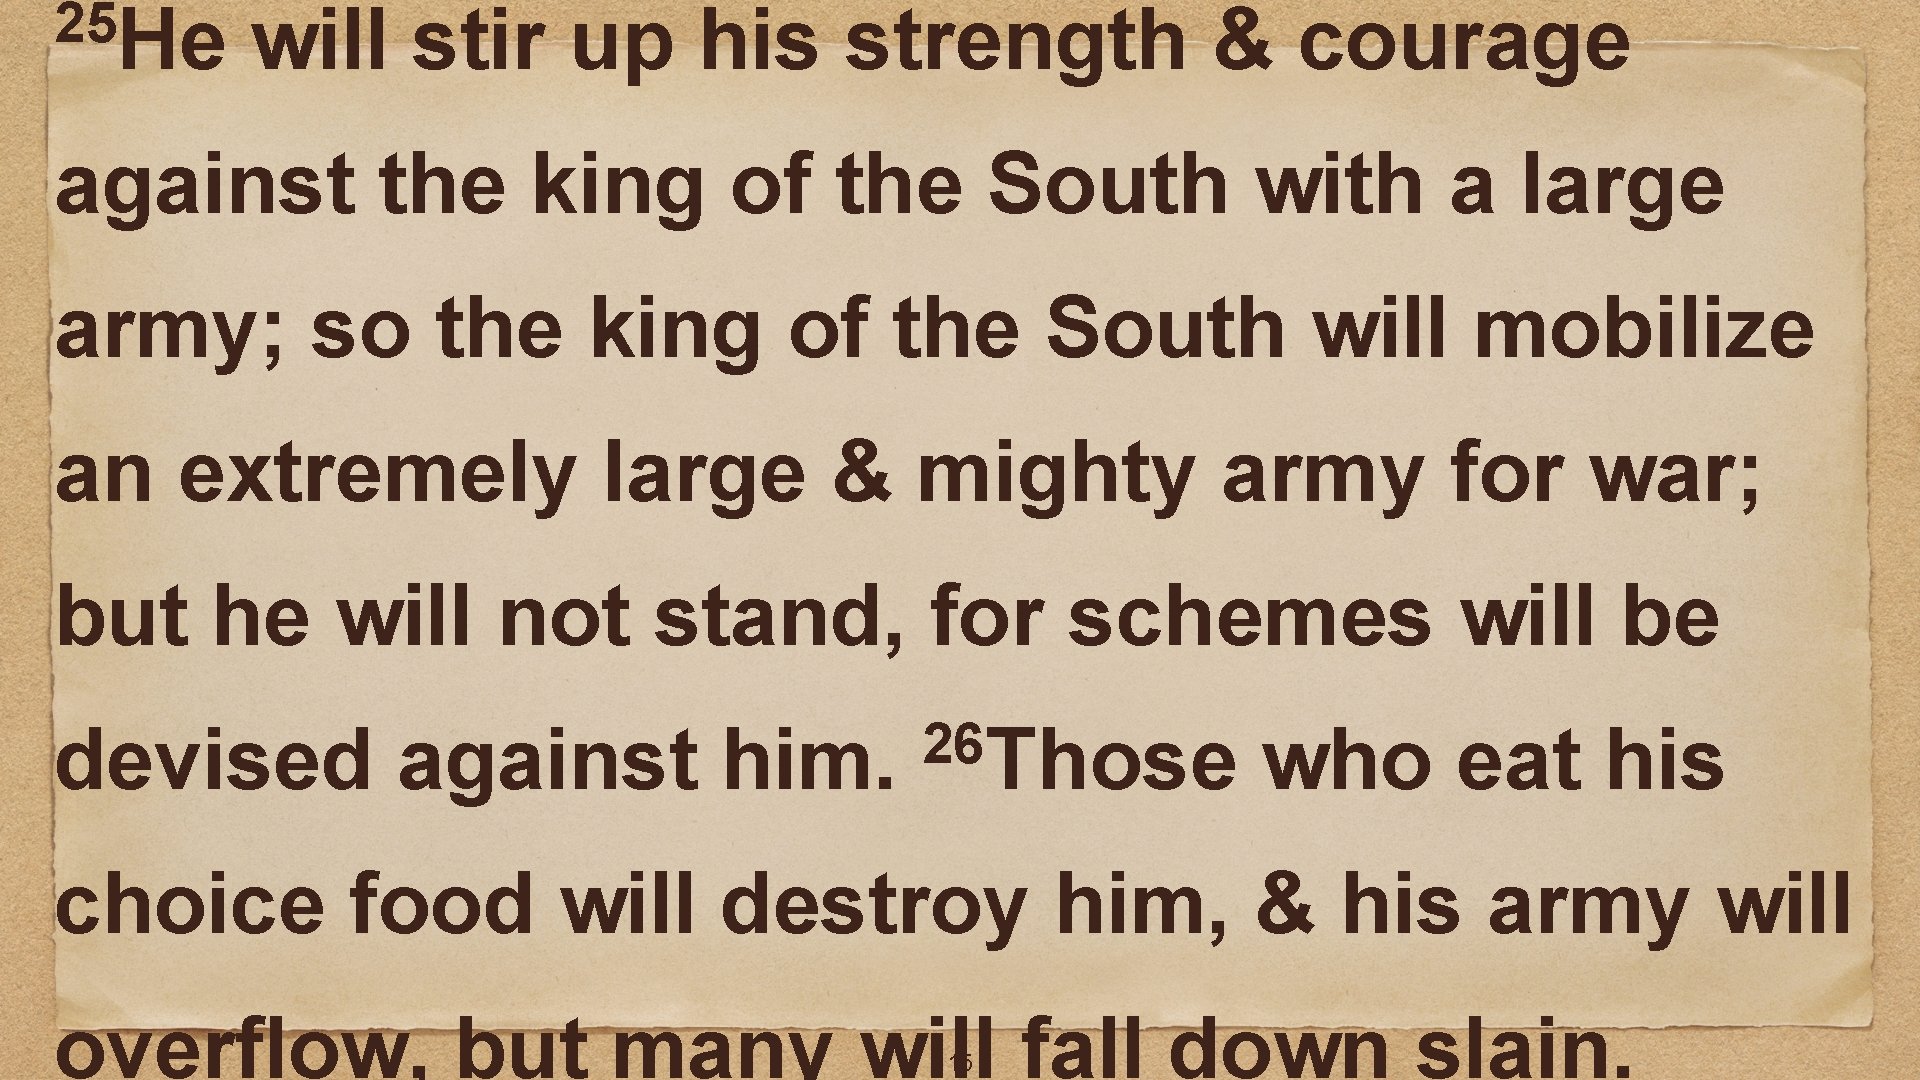 25 He will stir up his strength & courage against the king of the